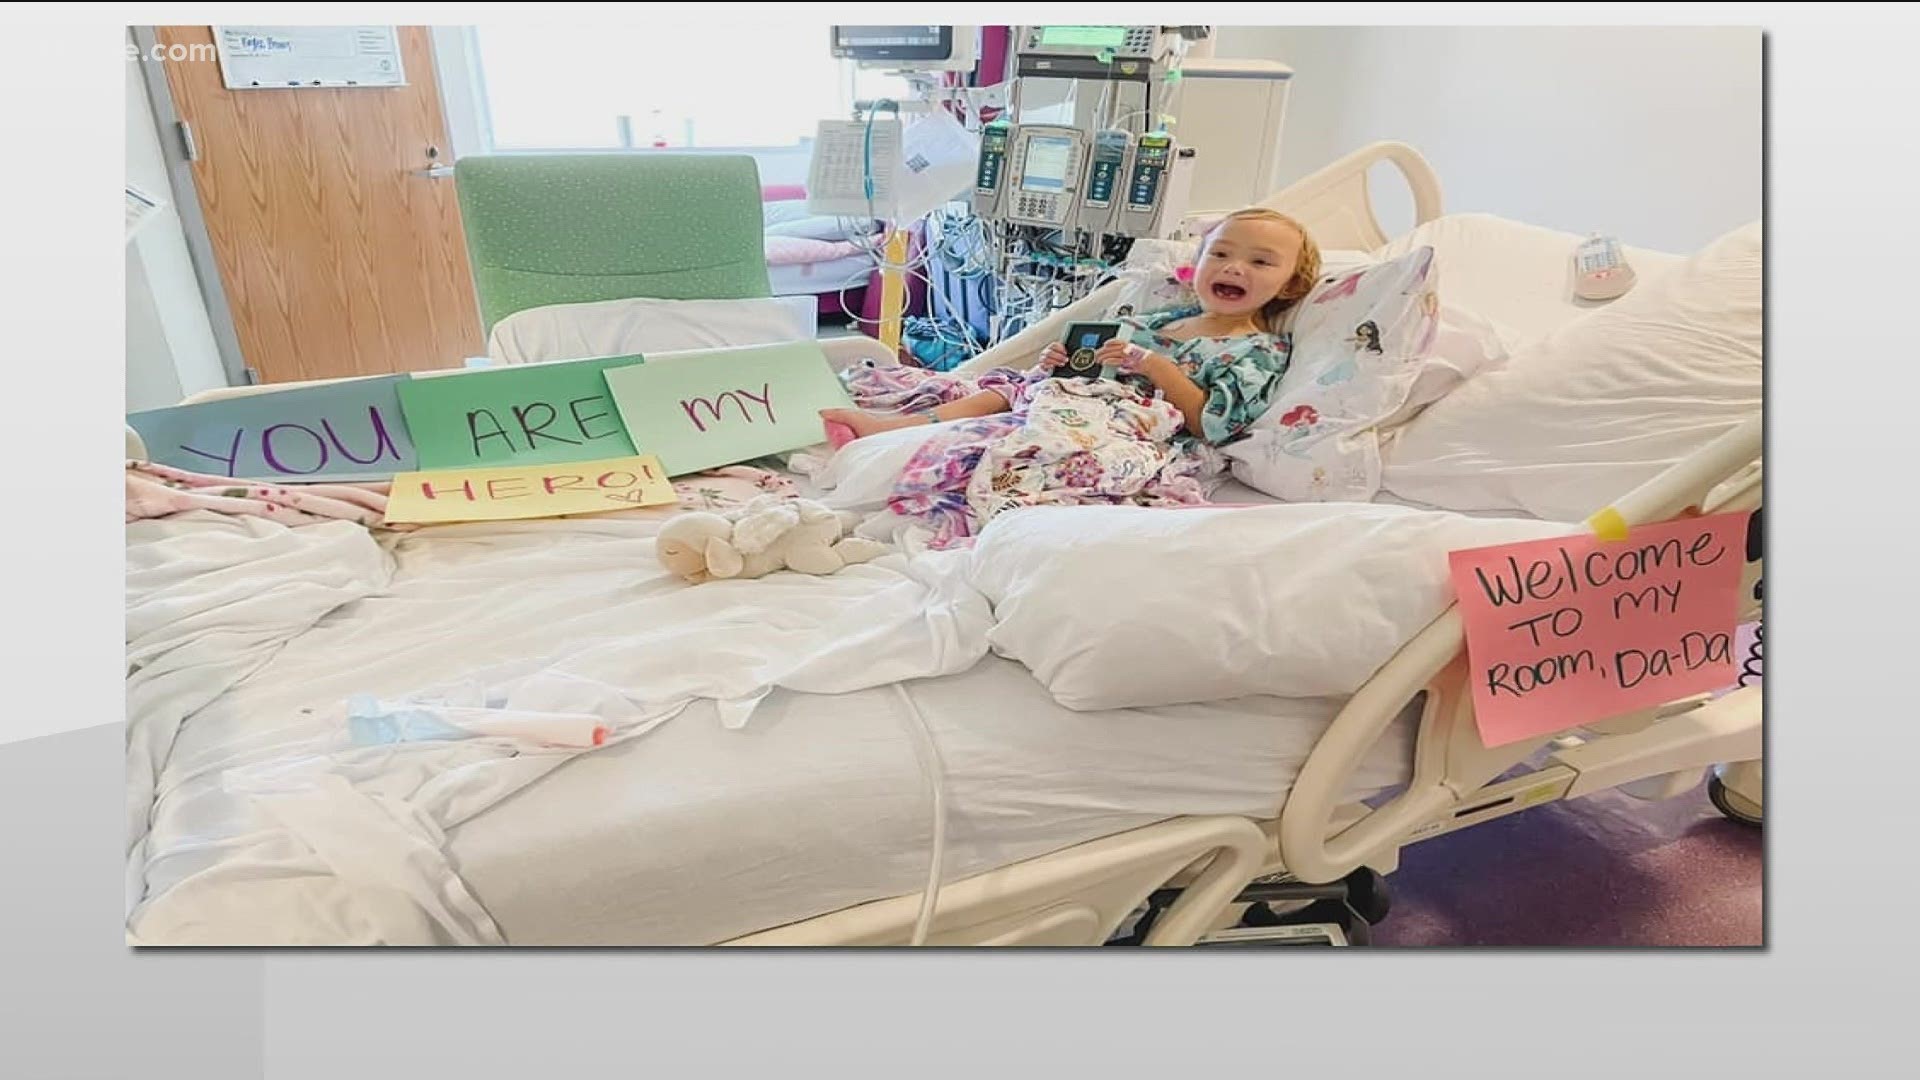 The life-saving surgery was completed at Children's Healthcare of Atlanta.